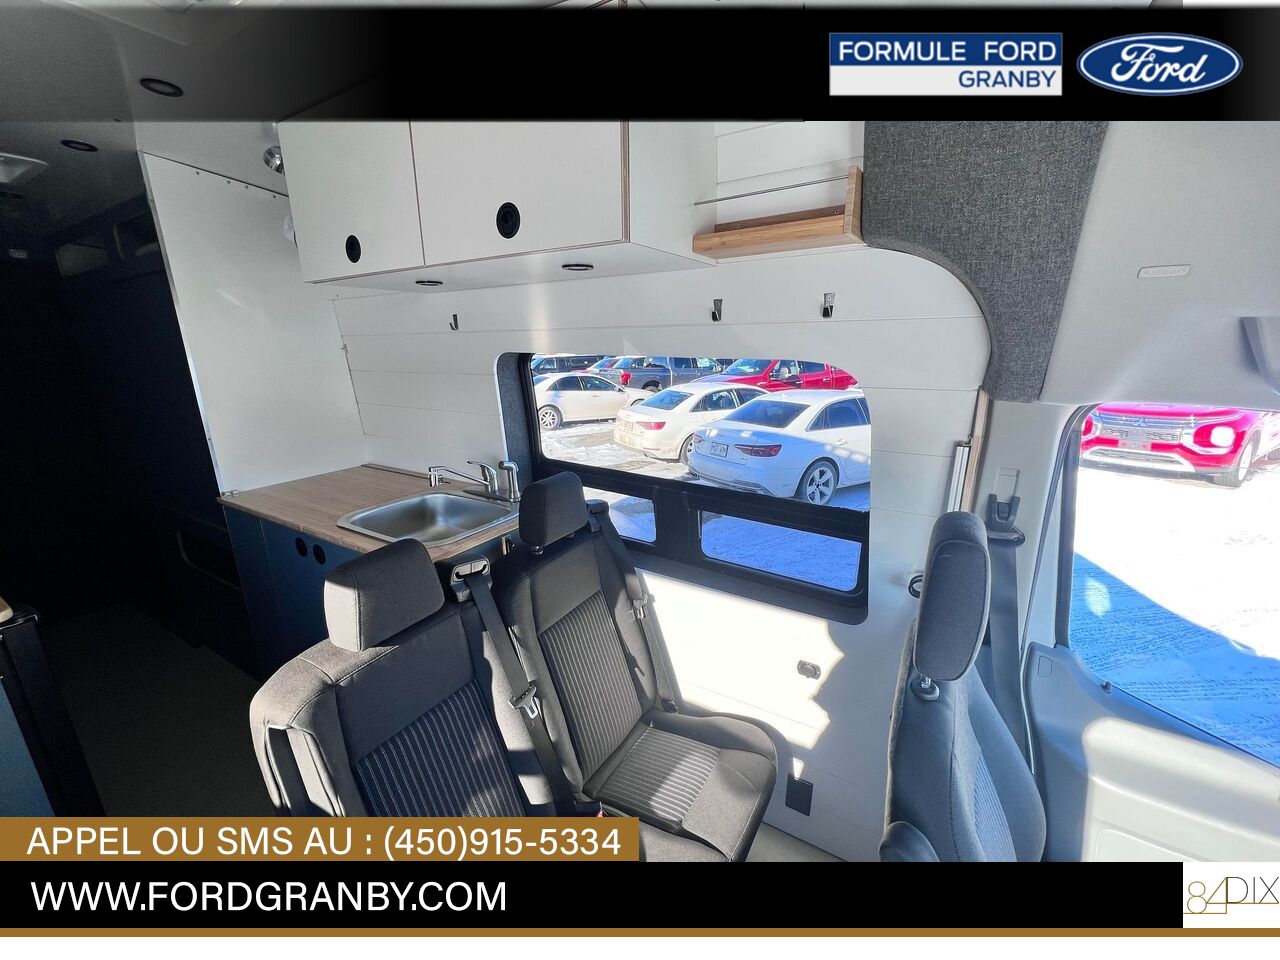 Ford Transit fourgon utilitaire 2019 Granby - photo #22